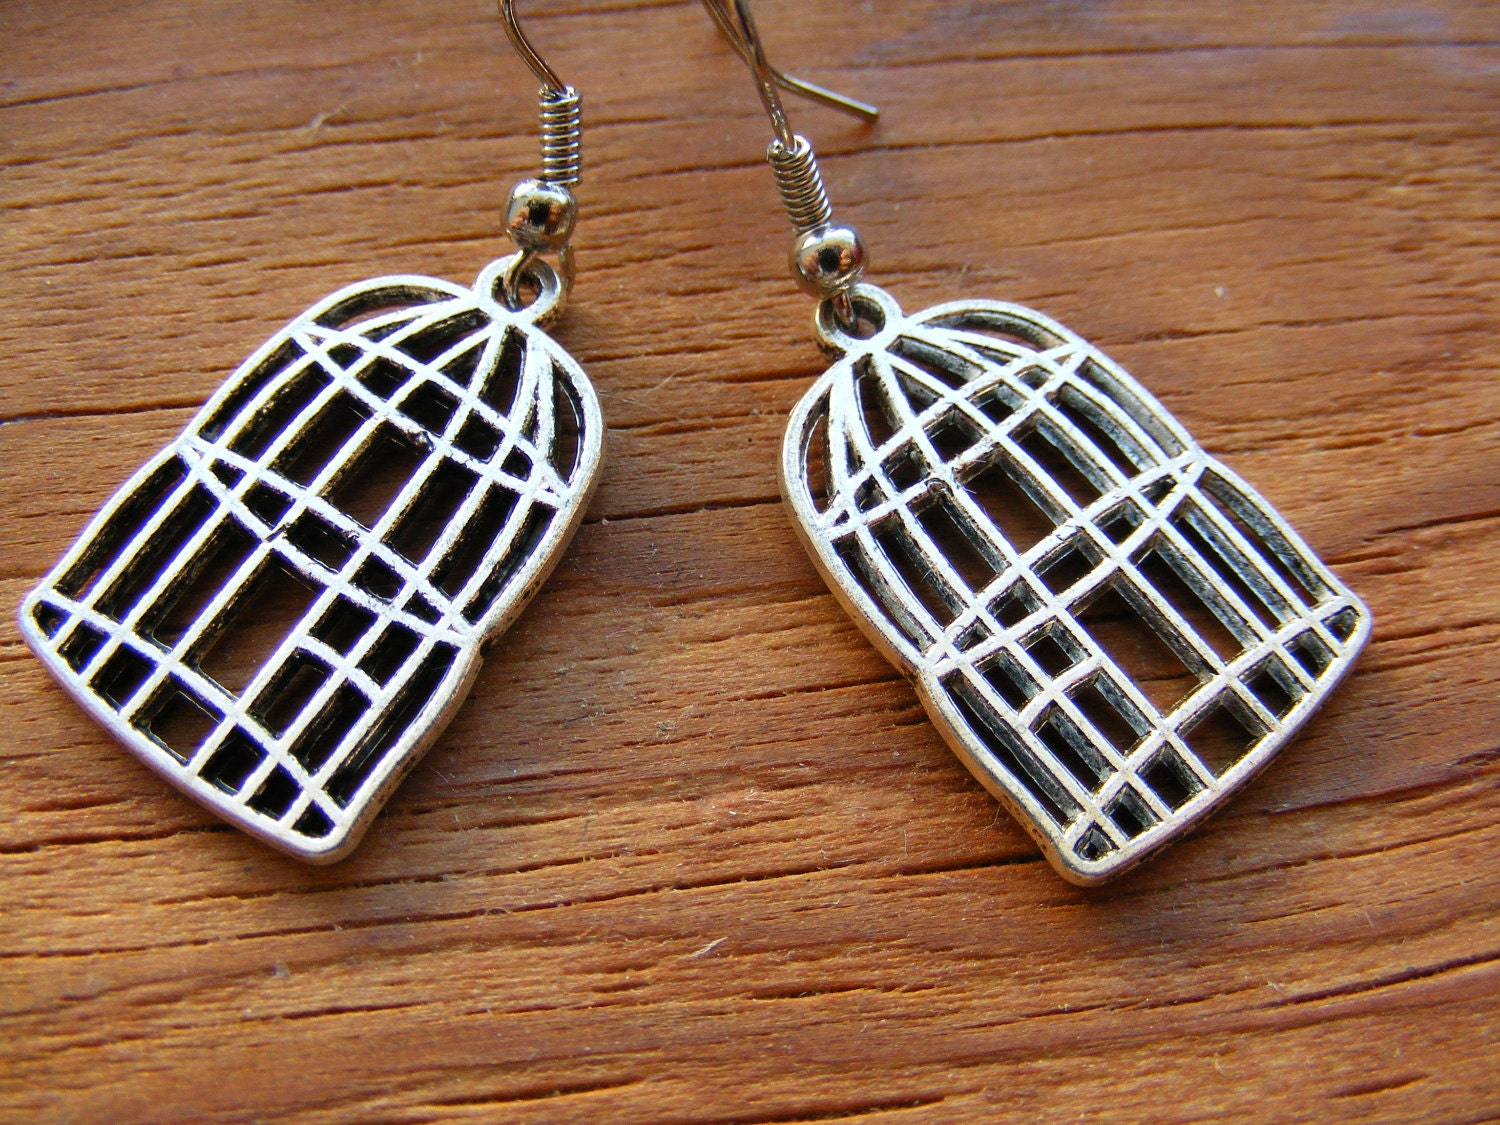 Earrings Silver or Bronze Bird Cages